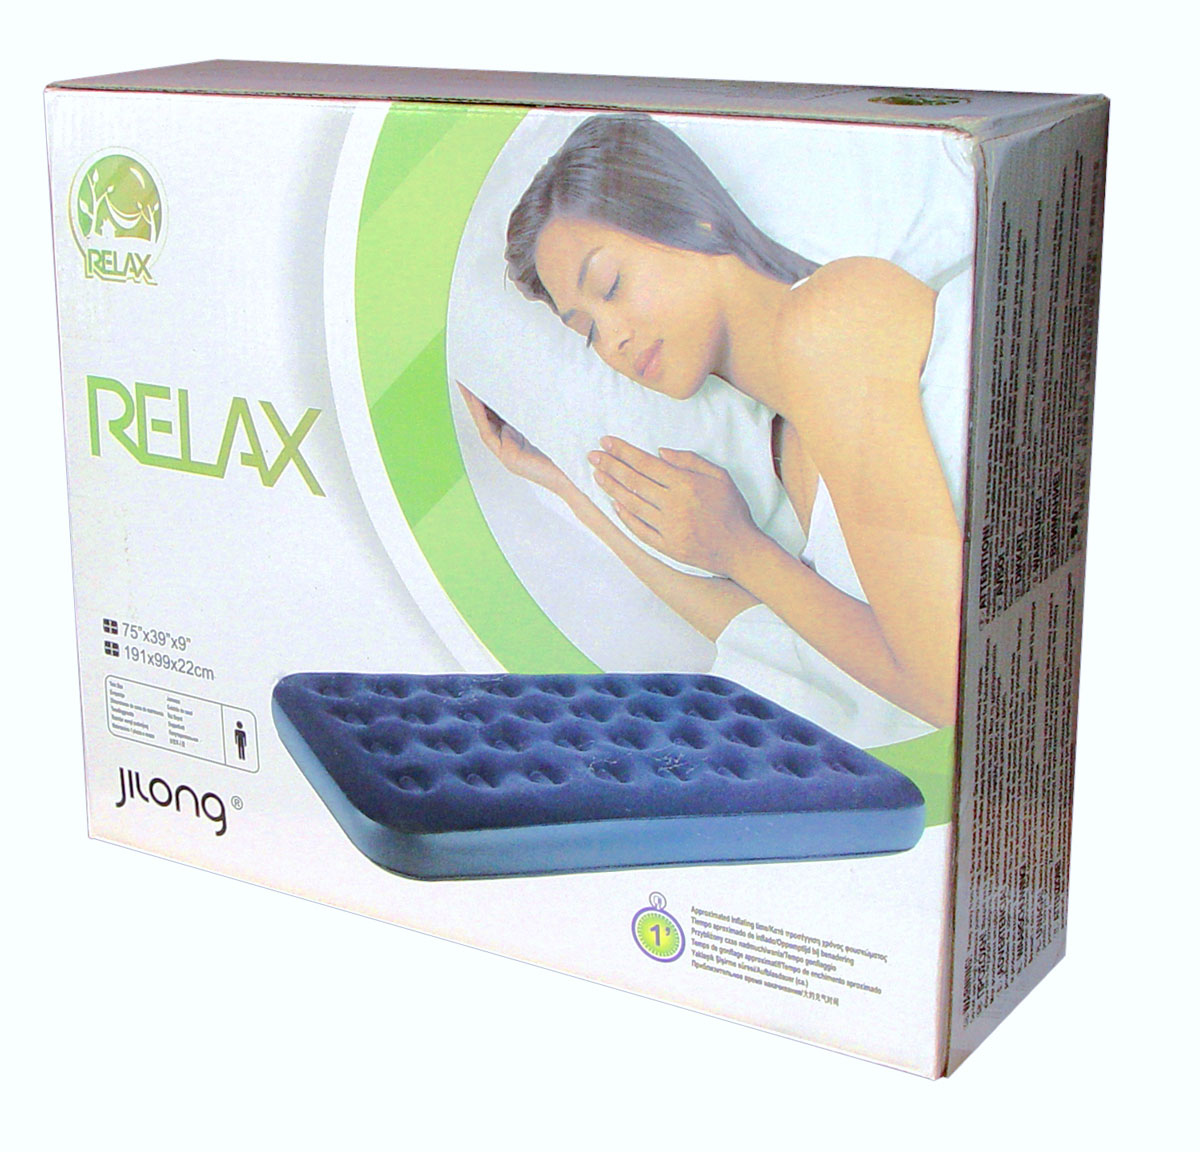   Relax "FLOCKED AIR BED TWIN", : , 191   99   22 